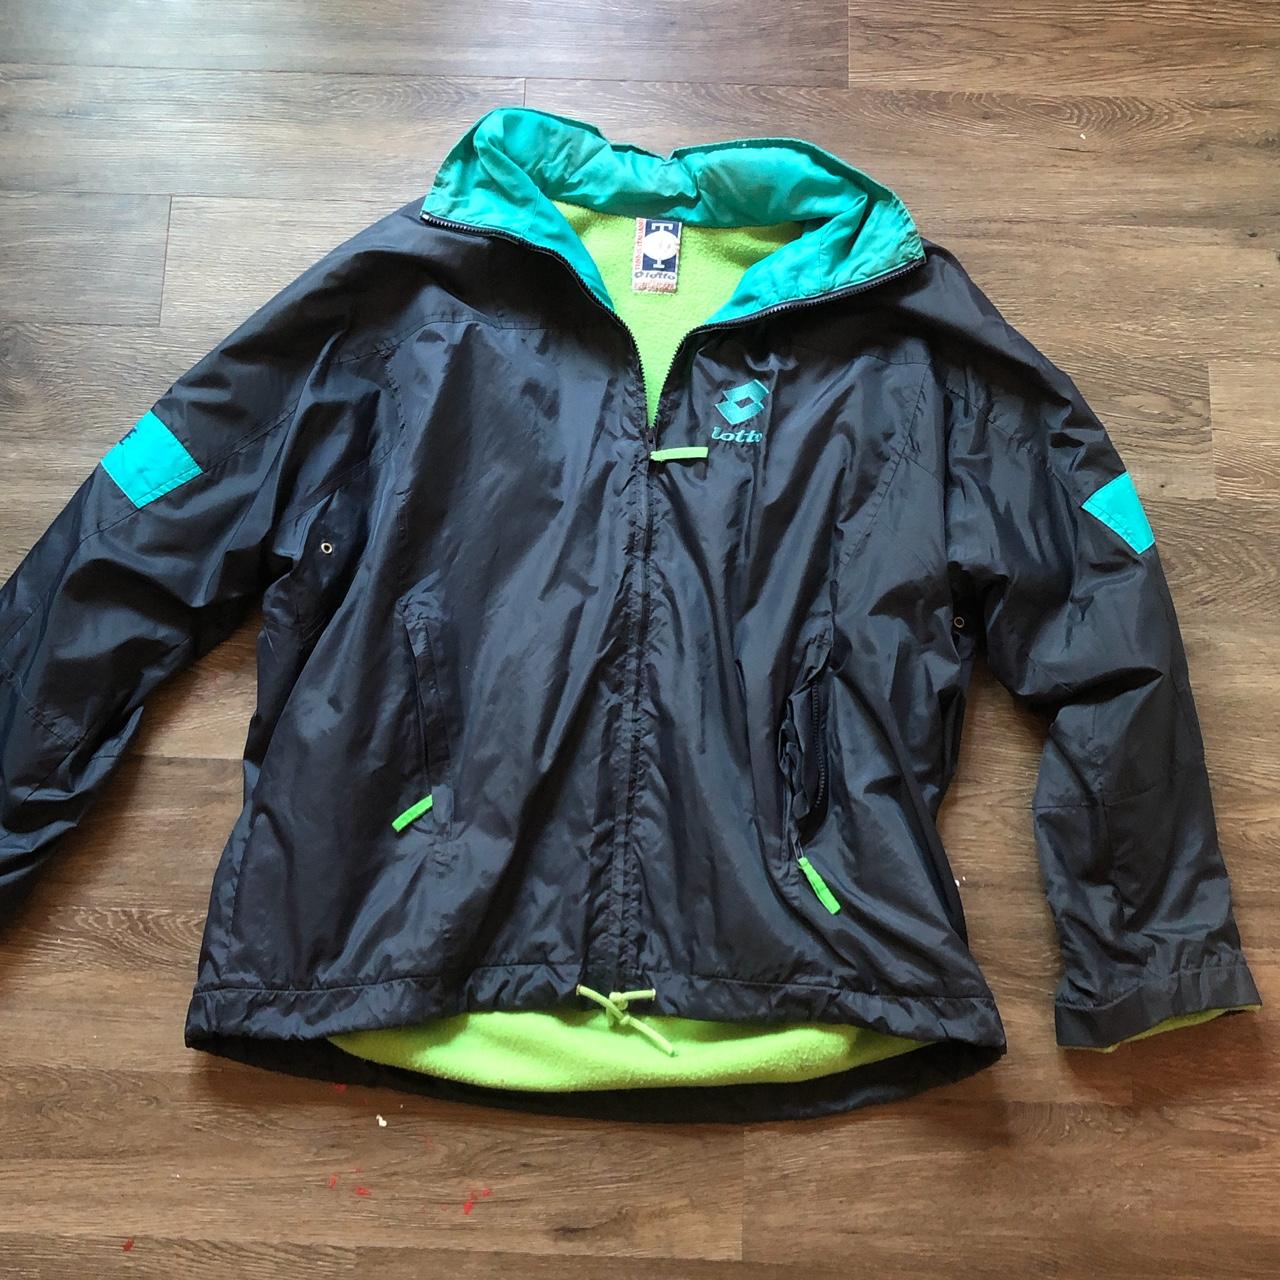 Lotto Men's Blue and Green Jacket